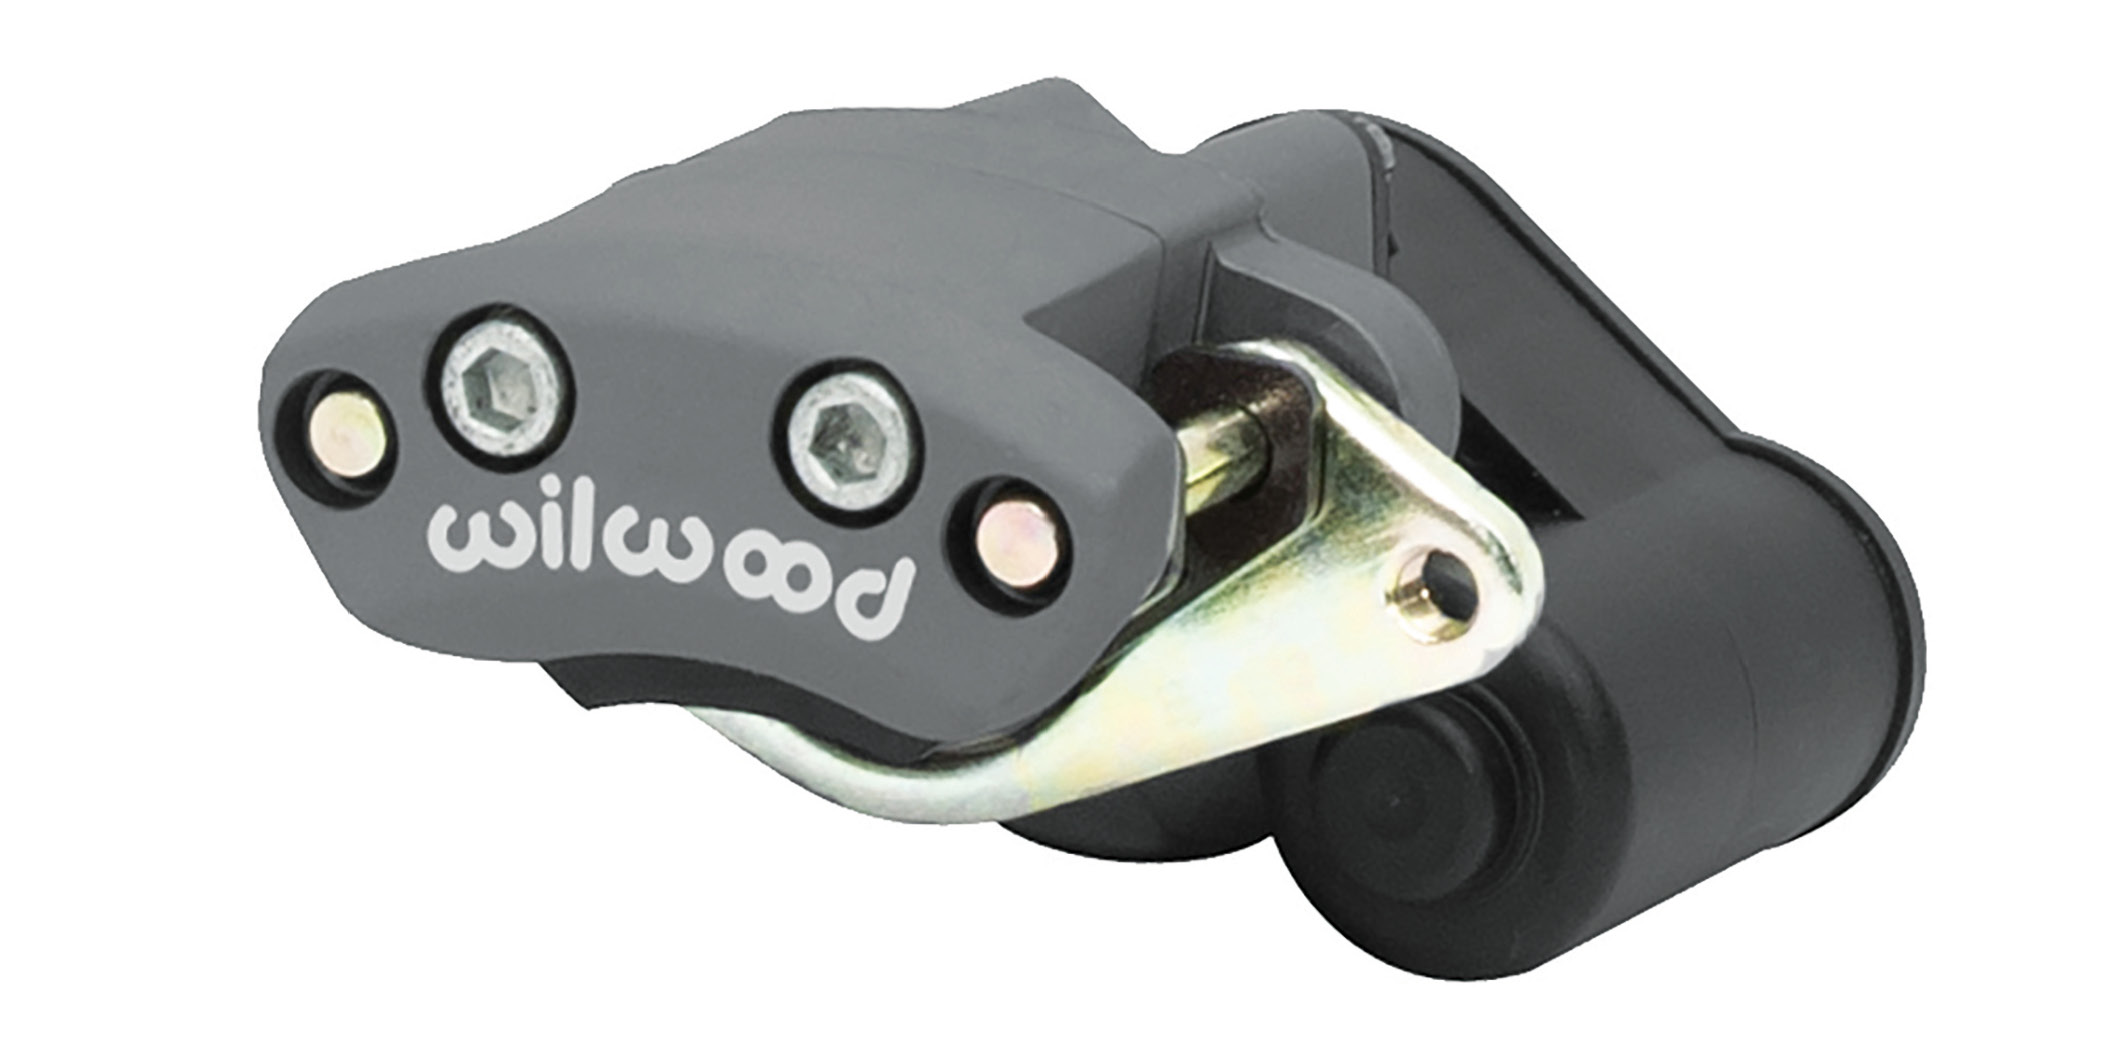 Wilwood’s EPB calipers are compact and available in gloss red or black powdercoat, polished aluminum, or Type-III hard anodized coating.